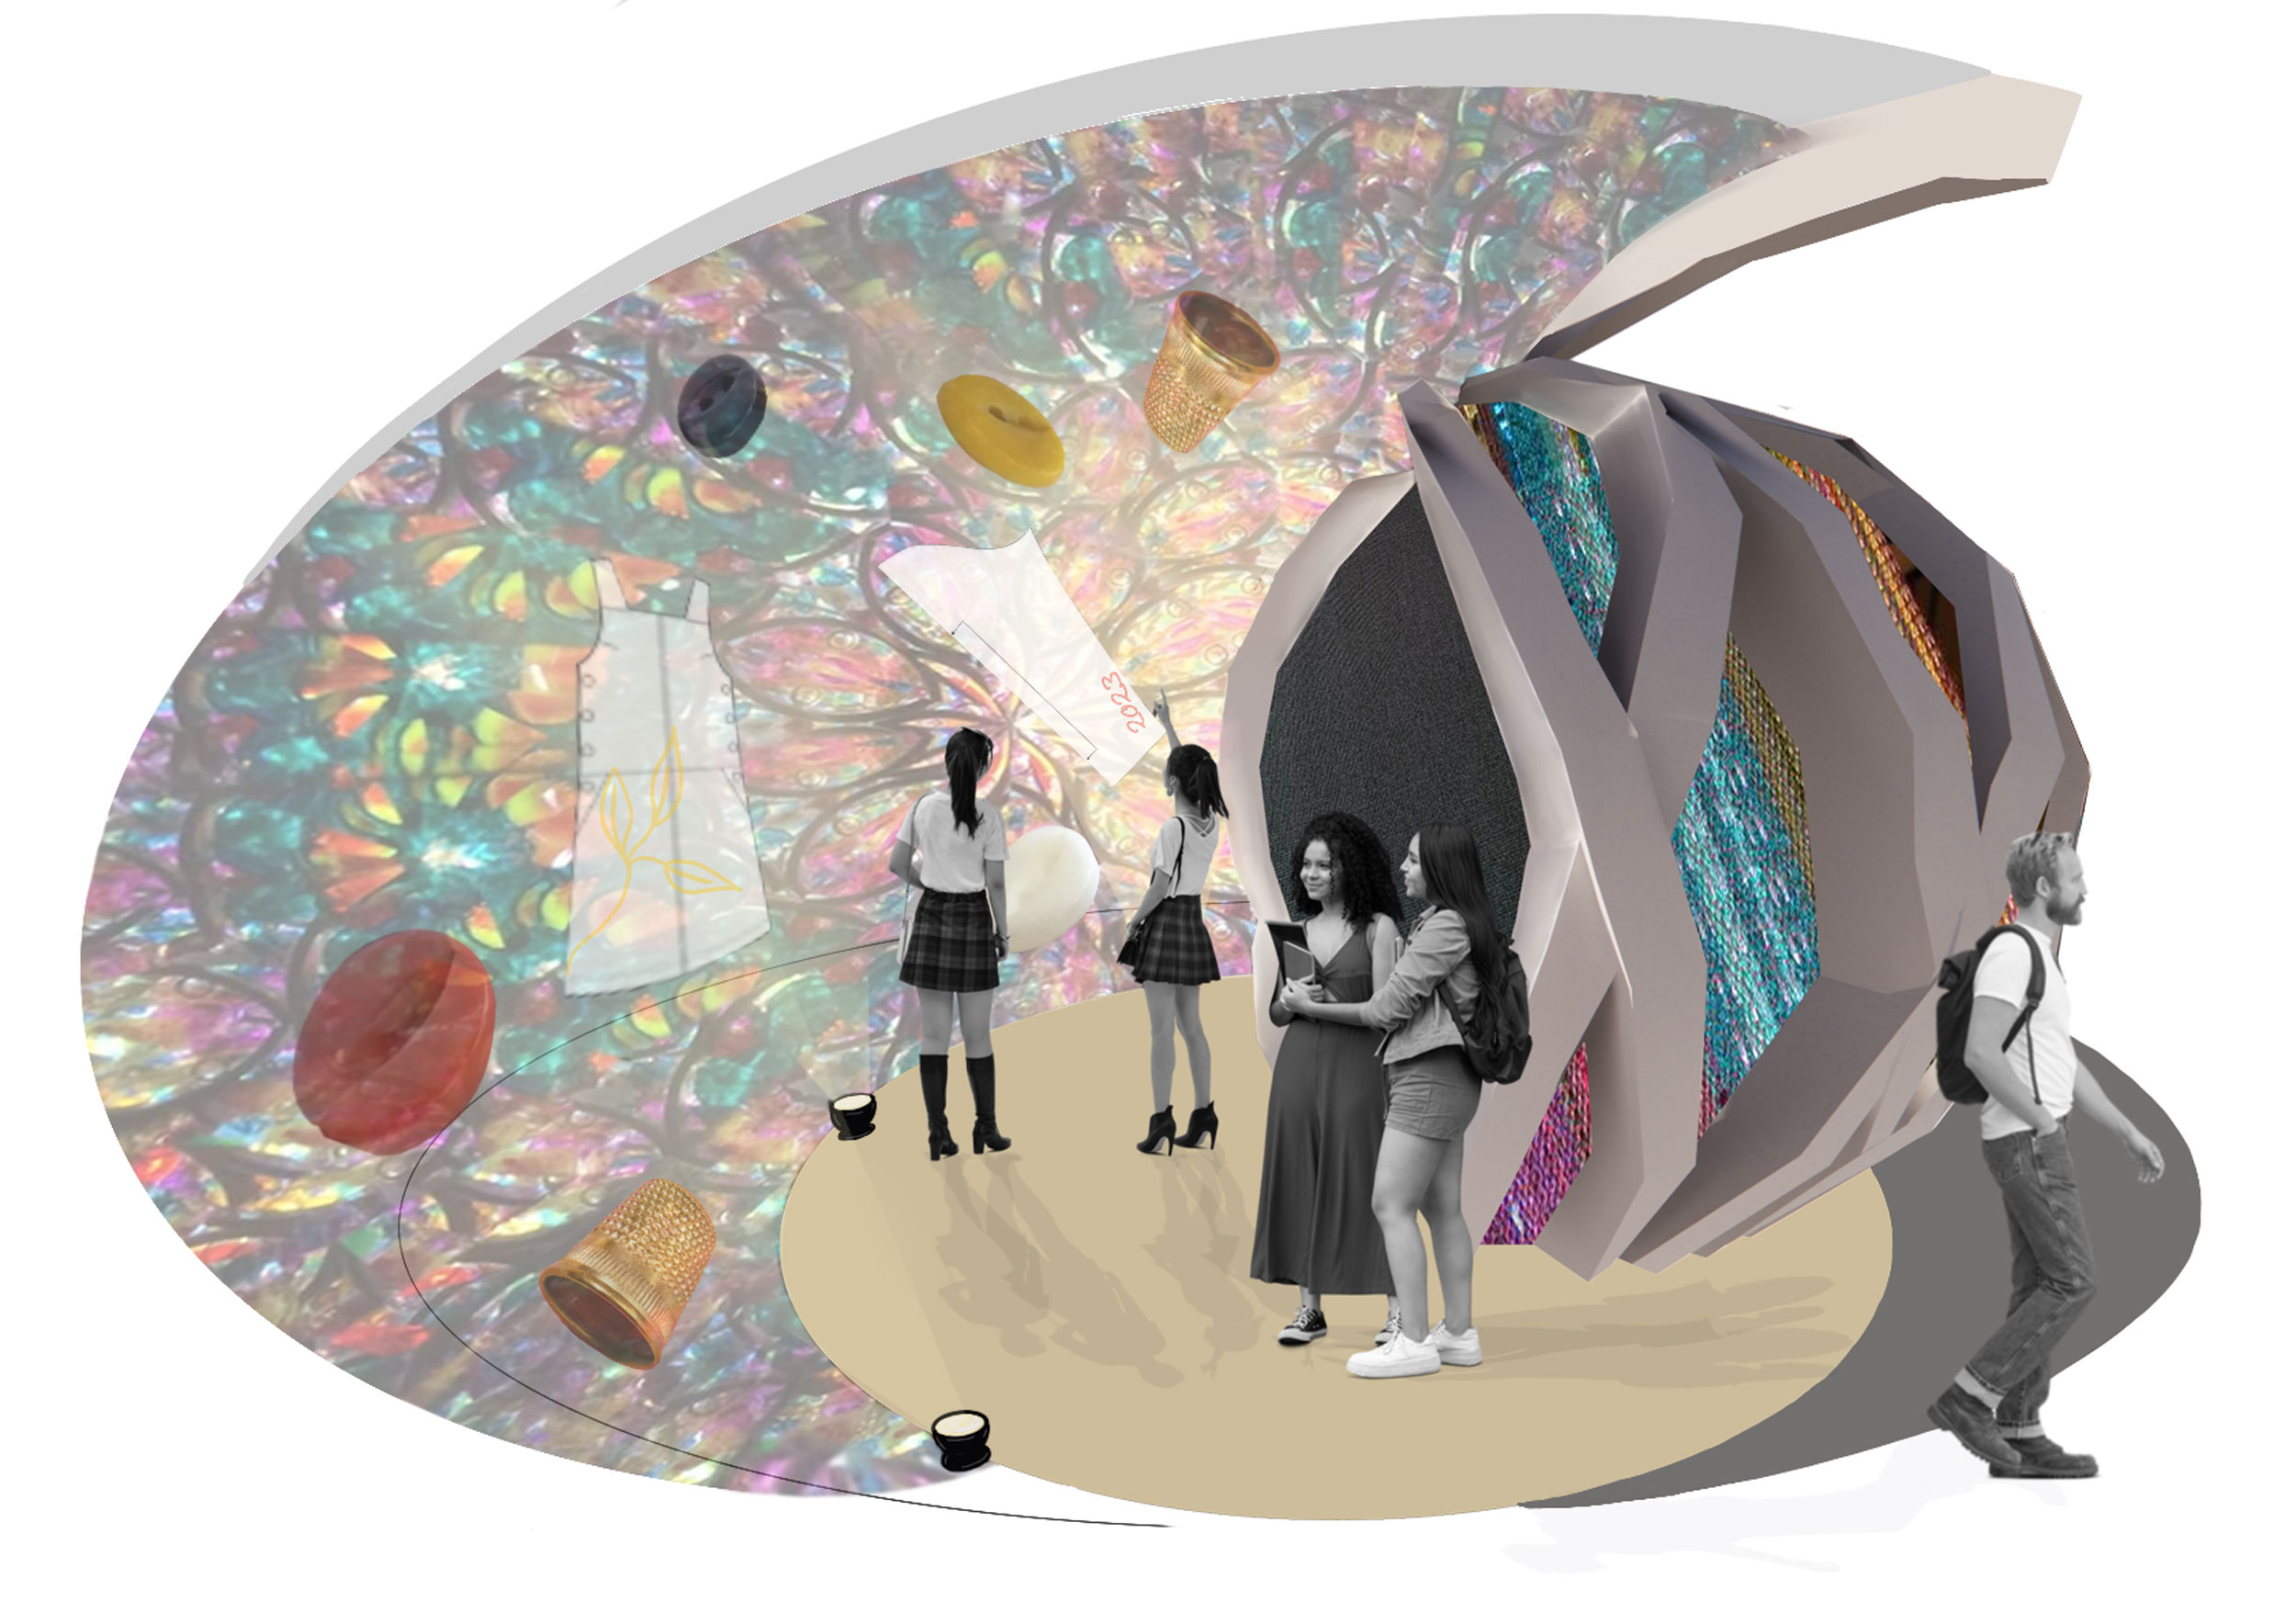 Pop-up museum exhibit render by Lucy Cave showing a portable museum space inspired by the main exhibition space theme. Round colourful space with projections on a curved wall.